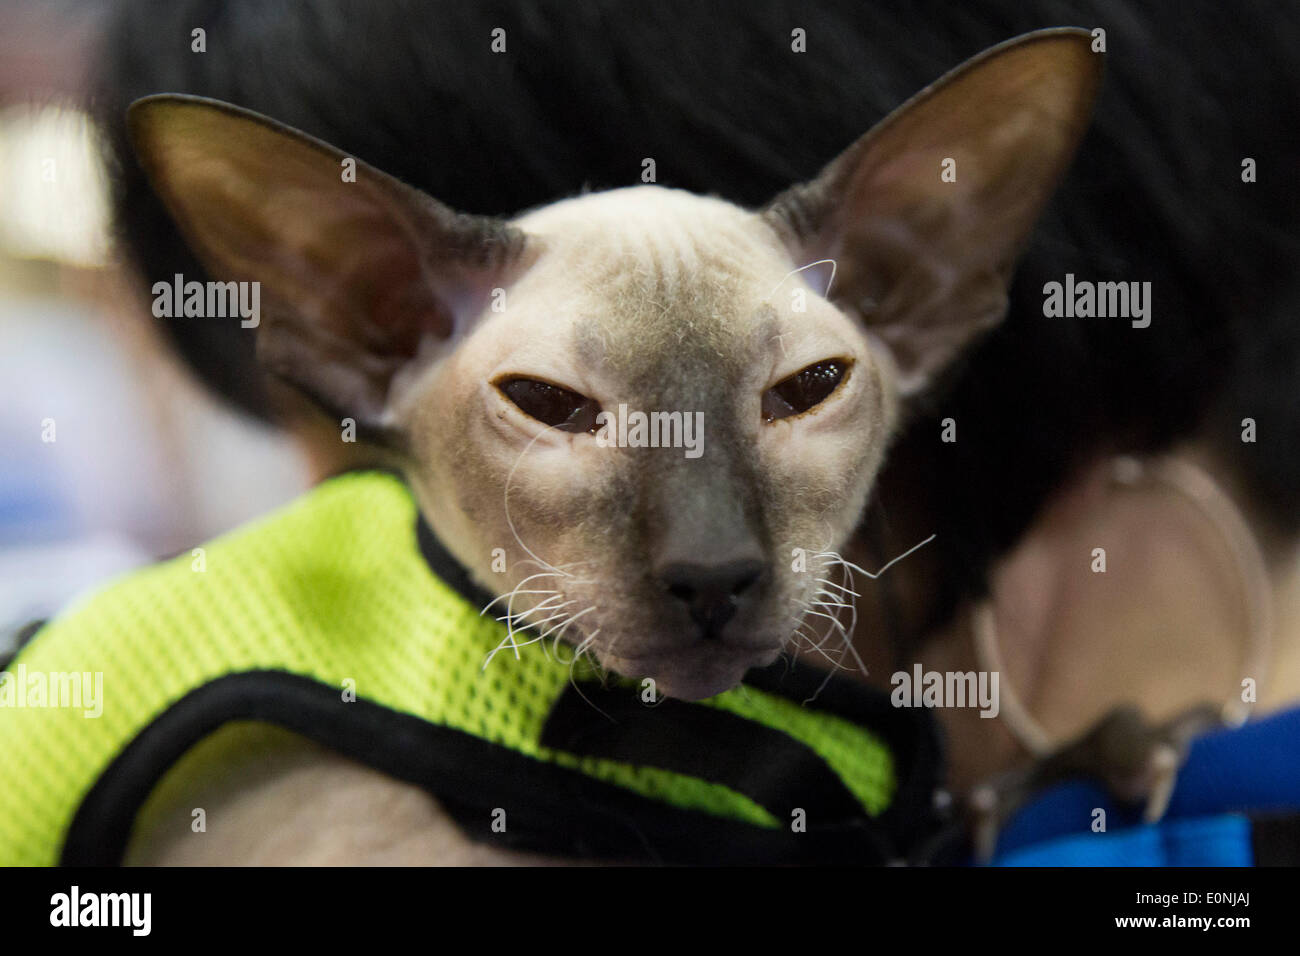 London, UK. 17 May 2014. Picture: A hairless Peterbald cat breed. The London Pet Show, now in its 4th year, takes place on 17-18 May 2014 at Earl's Court with pets such as reptiles, rabbits, ducks, cats, dogs and ponies on show. Photo: Nick Savage/Alamy Live News Stock Photo